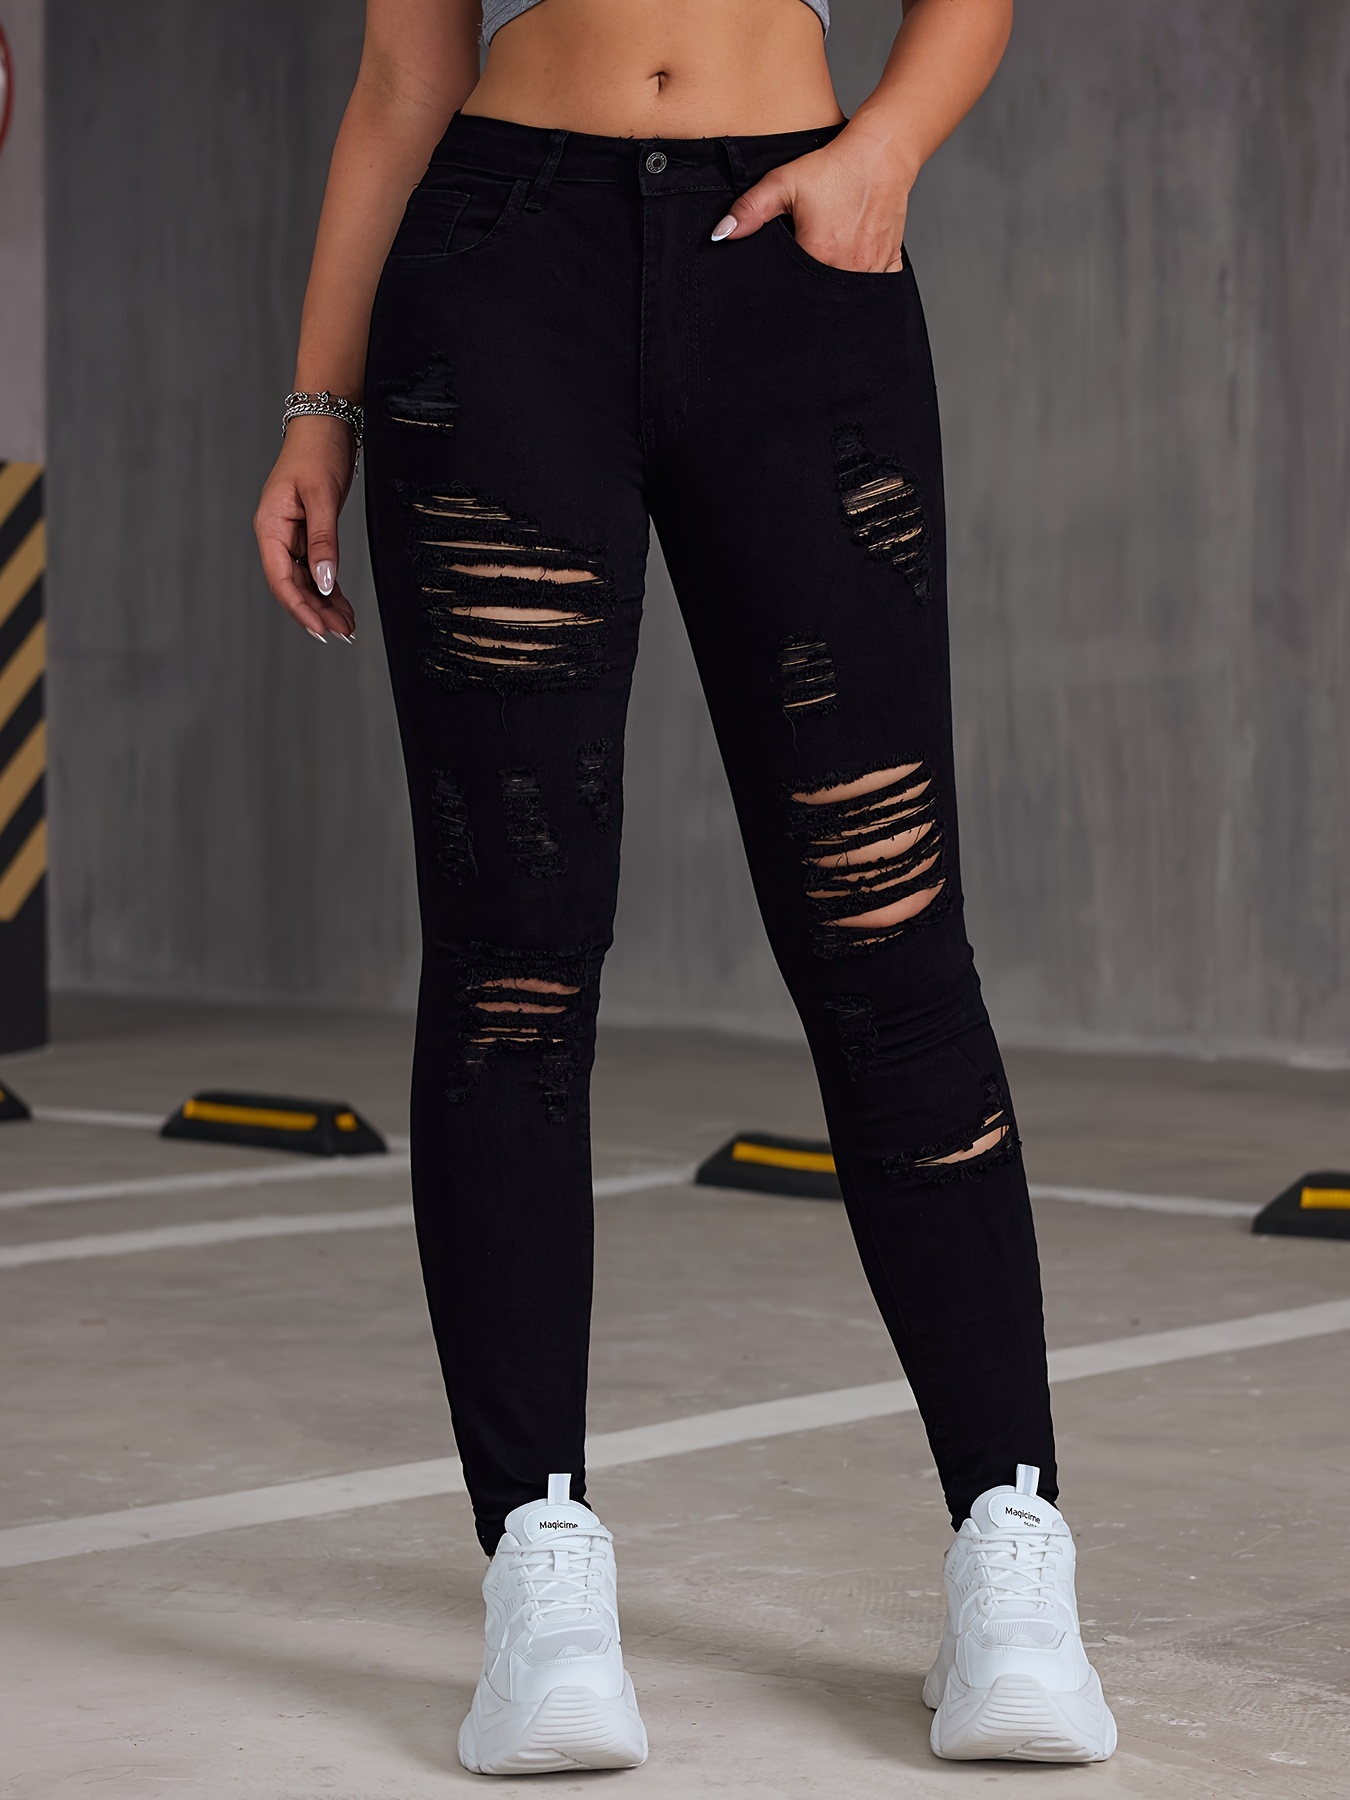 High Rise Distressed High Stretchy Skinny Jeans, High Waist Black Ripped  Denim Pants, Women's Denim Jeans & Clothing